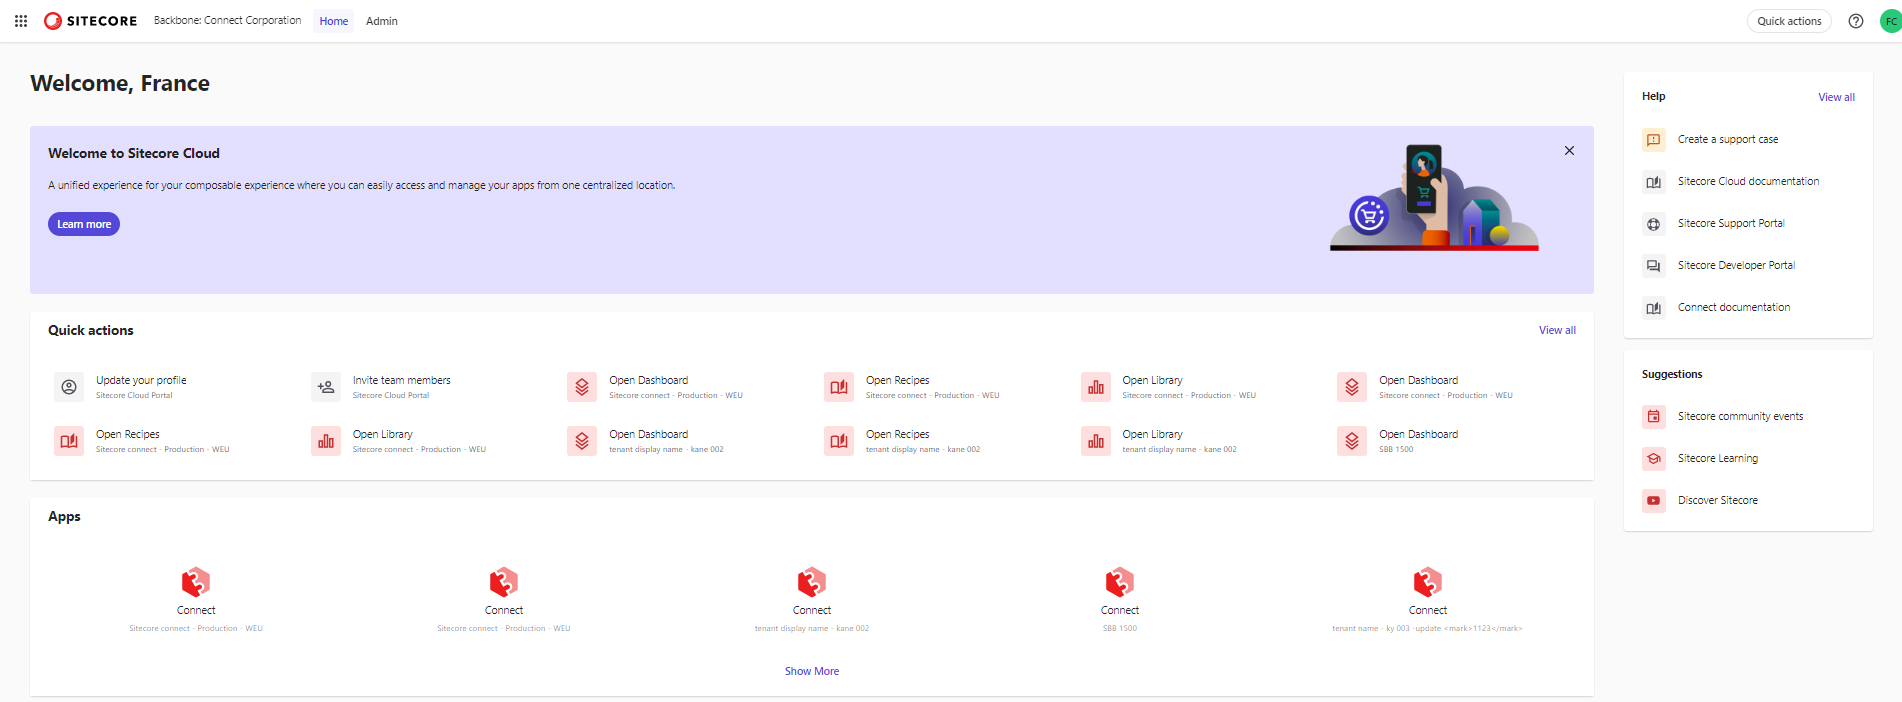 Shows the Connect apps and the Quick Actions that are available on the Sitecore Cloud Portal home page.